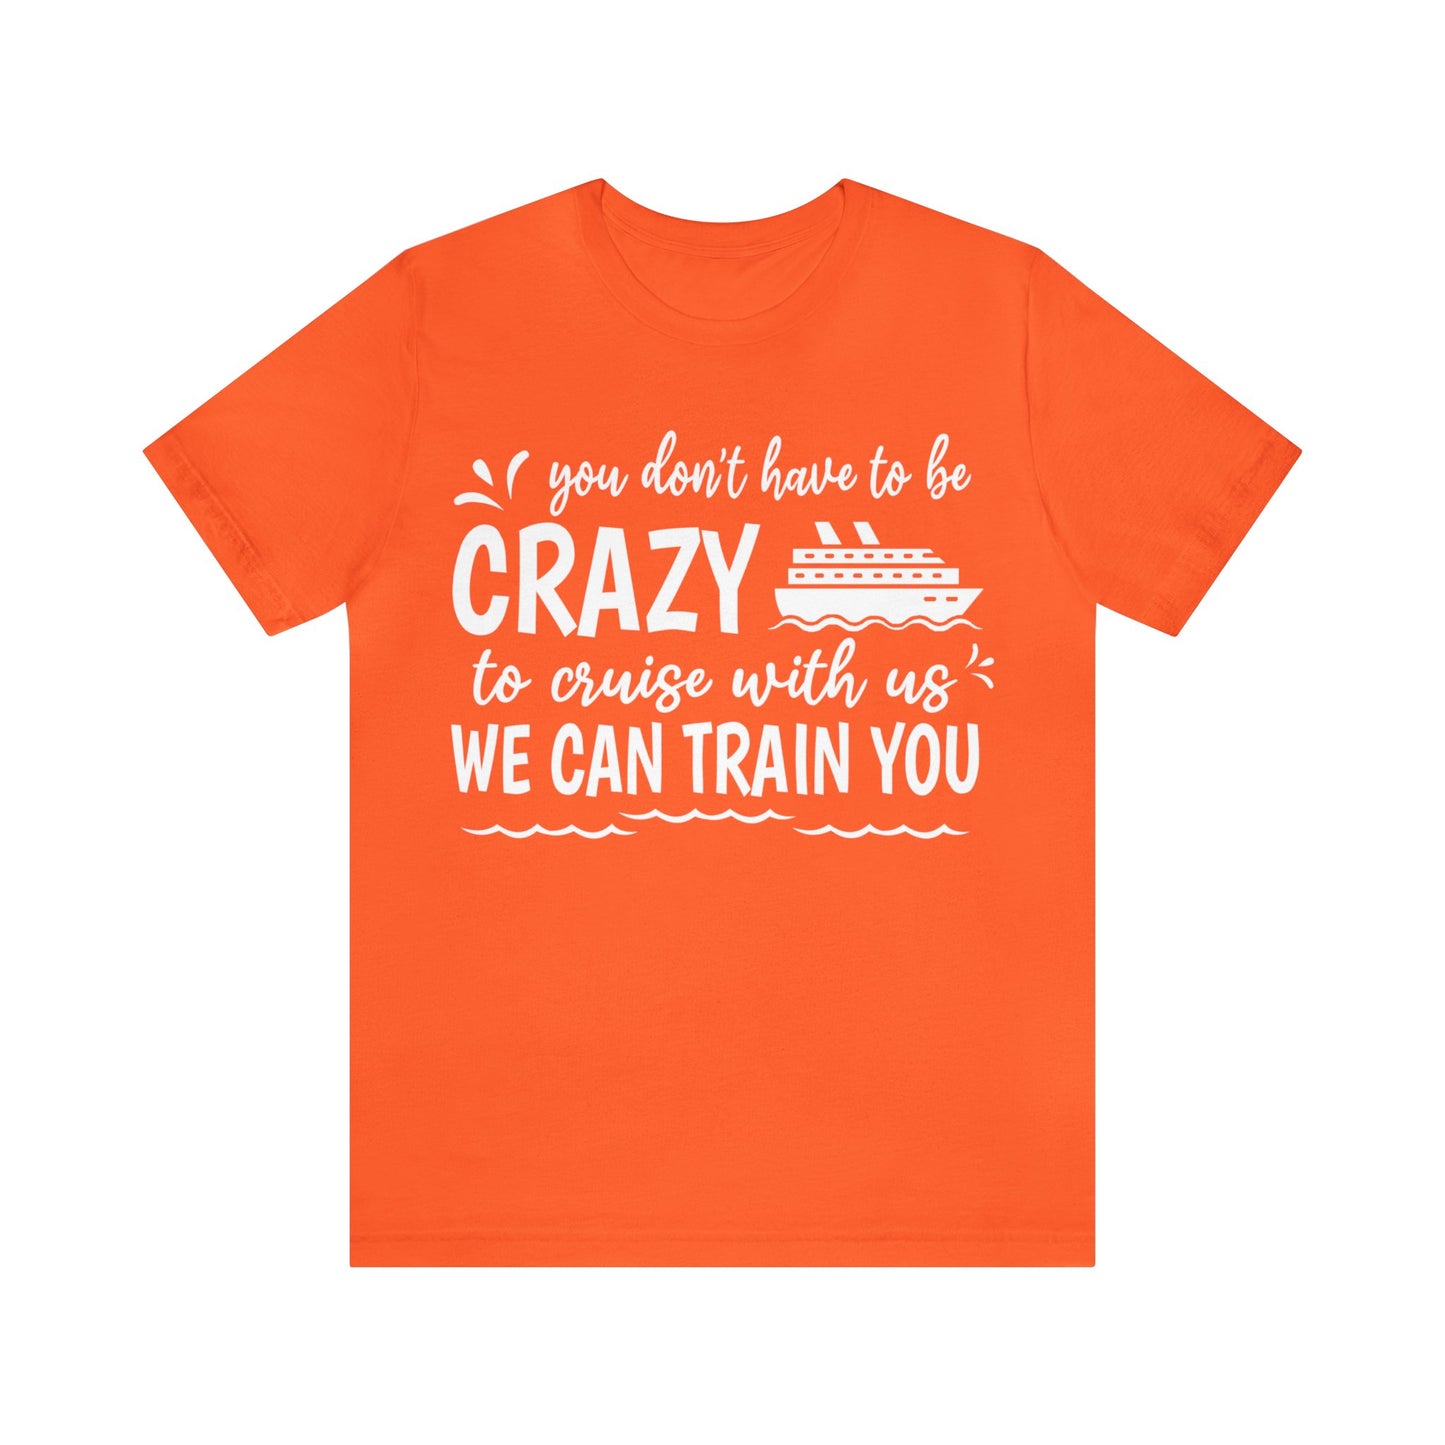 You don't have to be CRAZY to cruise with us We can train you Shirt in Orange